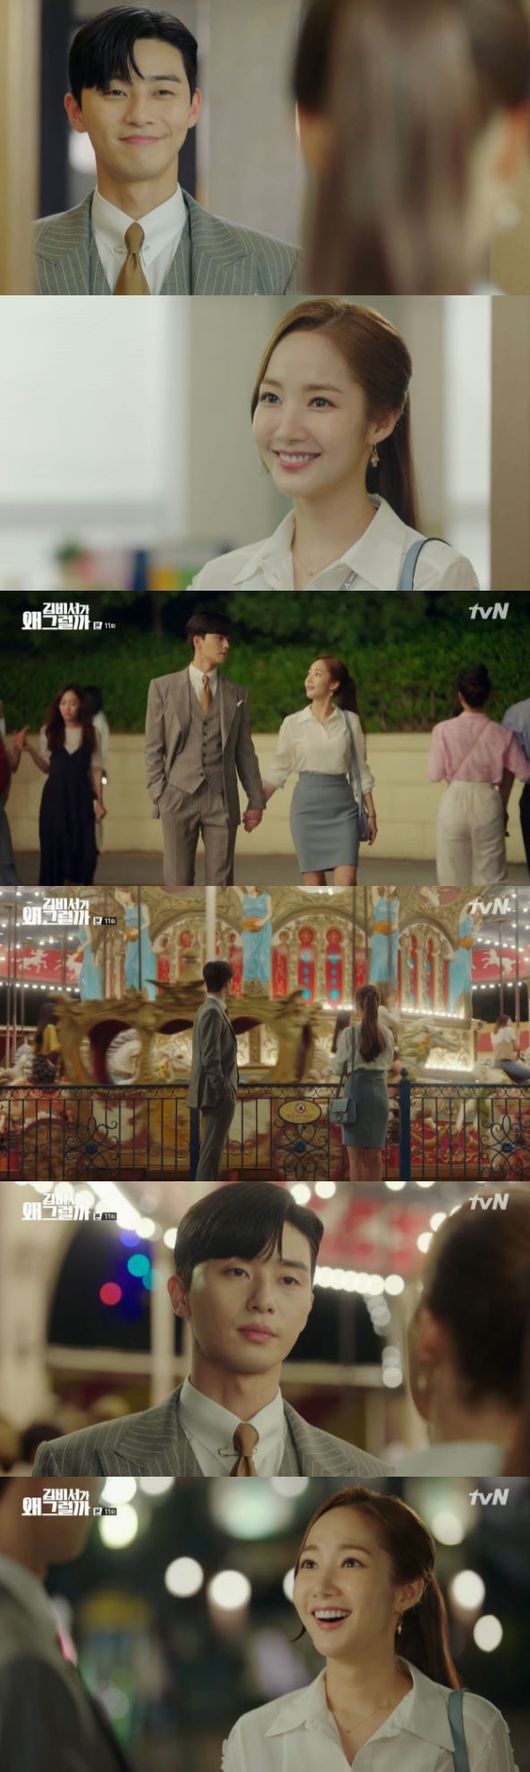 Park Seo-joon and Park Min-young have deepened their love over the past memory.In the cable channel tvN drama Why Secretary Kim Will Do It (playplayplayed by Baek Sun-woo, Choi Bo-rim, directed by Park Joon-hwa), which aired on the afternoon of the 11th, Kim Mi-so (Park Min-young) recalled all the memories that were kidnapped as a child.Lee Sung-yeon (Lee Tae-hwan) asked, Do you think my memory is wrong? But the smile did not answer easily.Then, at the Magic Show, when I saw a woman wearing high heels, I remembered a scary memory as a child and fell down.Smile woke up as a child and saw a woman passing by and shouted, Mom. The woman took her smile by the hand and said, Do you want your mother?So the smile was abducted and I met Young Jun in the house. Young Jun introduced himself to Smile as Sung Hyun, but he remembered that smile was Sung Yeon.Young-joon gave a caramel to the smile and soothed.She said, I gave him everything, but he wasnt. Hes the reason I wiped him out of my stomach.Why am I so hard. Im the only one who loved him. Would he feel a little guilty when I died? Come with me.Youll come with me, Young-joon said, and tried to wrap the line around her smile. You can start over now. But she said, Its late.Thank you, little man. I owe you a favor. But look at my last.The smile that woke up said, My aunt is strange, and Young Jun said, That is not my aunt. It is a big spider.Young-joon crawled out of the living room with his hands and feet with cables and his eyes closed to get scissors.Then, as Smile had a spider outside, she closed her eyes and grabbed her hand and escaped, saying, Im going to marry Smile.I feel like my brothers prince, he said, and Young-joon fell down in front of the police station after seeing the fantasy of the dead woman.I was surprised to see a young woman like her even after she grew up, and when I saw a cable tie, I suffered from trauma.I was sad to see a smile that I could not recognize, but I thought it was natural that I would be enough to carry the memory of the day alone.Nevertheless, the mind went and Young Jun started to put his smile on his side as a secretary.For a smile that was hard to speak Japanese alone in the specs of good people, Young-joon gave Japanese homework every day and gave it to him.Sung Yeon asked Young Jun, I was not trapped there, but you were you, remembering everything at the time, you were strange without guilt, not me, but you were trapped.I was all Memory. And now I know why I wanted to find him so much.I thought he wanted to thank me for protecting me, even though he was very scared and hard that day. Why did you keep it secret? Yong Jun said, I could not forget a day.I closed my eyes and I thought it was as clear as yesterday, and I was glad that Secretary Kim couldnt remember. I didnt want to share the pain.I wish I hadnt remembered it forever. Smile said, I dont really fit in with the vice chairman who is so caring now.Ill be there for you tonight, just like that day, Young-joon promised, and Ill be there for you.Sung Yeon was shocked to recall the memory that she had abandoned Young Jun on the road and was kidnapped.Why didnt you tell me that your memory was wrong early, she told Choi (Kim Hye-ok) and Young-joon didnt lose his memory. I remember everything then.Young Jun presented Nanas suite home set to Smile and asked, Is this okay with your husband?The smile said, I do not remember, and Young-joon said, Can you buy Nanas suite home? Did not you ask me to marry embarrassingly, saying that I have a lot of money?The nine-year-old asked me to buy Nanas suite home set at home, and I was in a hurry at home. I asked if I had a problem with my childhood or identity, but it was okay. The gum is made of cowhide and then buried on the ground, and it disappears without traces, said Miso. Memory can disappear without traces like dog gum.The smile was good because the vice chairman is my brother, and Young-joon laughed with a back hug and laughed, I have only endured what I want to tease. Young-joon said to the smile that he is going to work.She said, You see how my hands are shrunken? Young-joon said, I cant work with my hands. She stopped her from coming to work.I dont think there are many men who pretend to be good, but not many women who dont do things in time, said Young-joon, who had come to work even in the middle of the day, in front of Kim Ji-ah (Pyo Ye-jin), who said, I dont think there are any women who pretend to be good at it.Young-joon devised a way to get a smile off work quickly. He ordered a hotel spa in all the annexes.Young-joon said, I sent Kim to rest, so rest well. The smile sent him a heart problem.You can send an empty heart, but you send a full heart, is it that you are so full of hearts for me? Young-joon replied, I will send two because the scale is big.Young-joon continued his love affair with Al-Kon-Dal-Kong, including early leaving the company for a smile. Young-joon came to the amusement park with a smile after work.The house where the two of them were trapped was Carousel, Young Jun said, I was glad to know that.I thought that the terrible memory of that time could be covered by people who are happy on Carousel. Smile looked at Carousel, saying, Now, here, I will be full of joy instead of painful things. The old house where the smile lived became a fountain.We will be happy in the future, because we will continue to be together, Smile said.Young-joon said, I go to my house tonight, because I do not want to be alone. Every night I think of her, I can not sleep, and even if I sleep, I have nightmares.I dont want to leave him alone tonight because hes going to be in nightmares like me, said Smile, in fact, I dont remember things well then.I just thought it was a very scary spider when I saw a dead person. It is not too painful. So if it is really hard, I will talk about it. Young Jun promised that he would protect him for the rest of his life and promised to call me because I will be waiting all night.Young Jun said, All my moments were you, even when I loved and hurt, and even when I separated, you were my world and all the moments.I may not be able to explain my life so far without you now, he monologued.The smile on the bed alone was afraid of the sound from outside. At this time, the doorbell rang outside, and Young Jun came to visit.Young-joon said, I want to sleep at Kims house because Kim does not want to come to my house. Lets sleep together today.Why would Secretary Kim do that? Capture the broadcast screen.